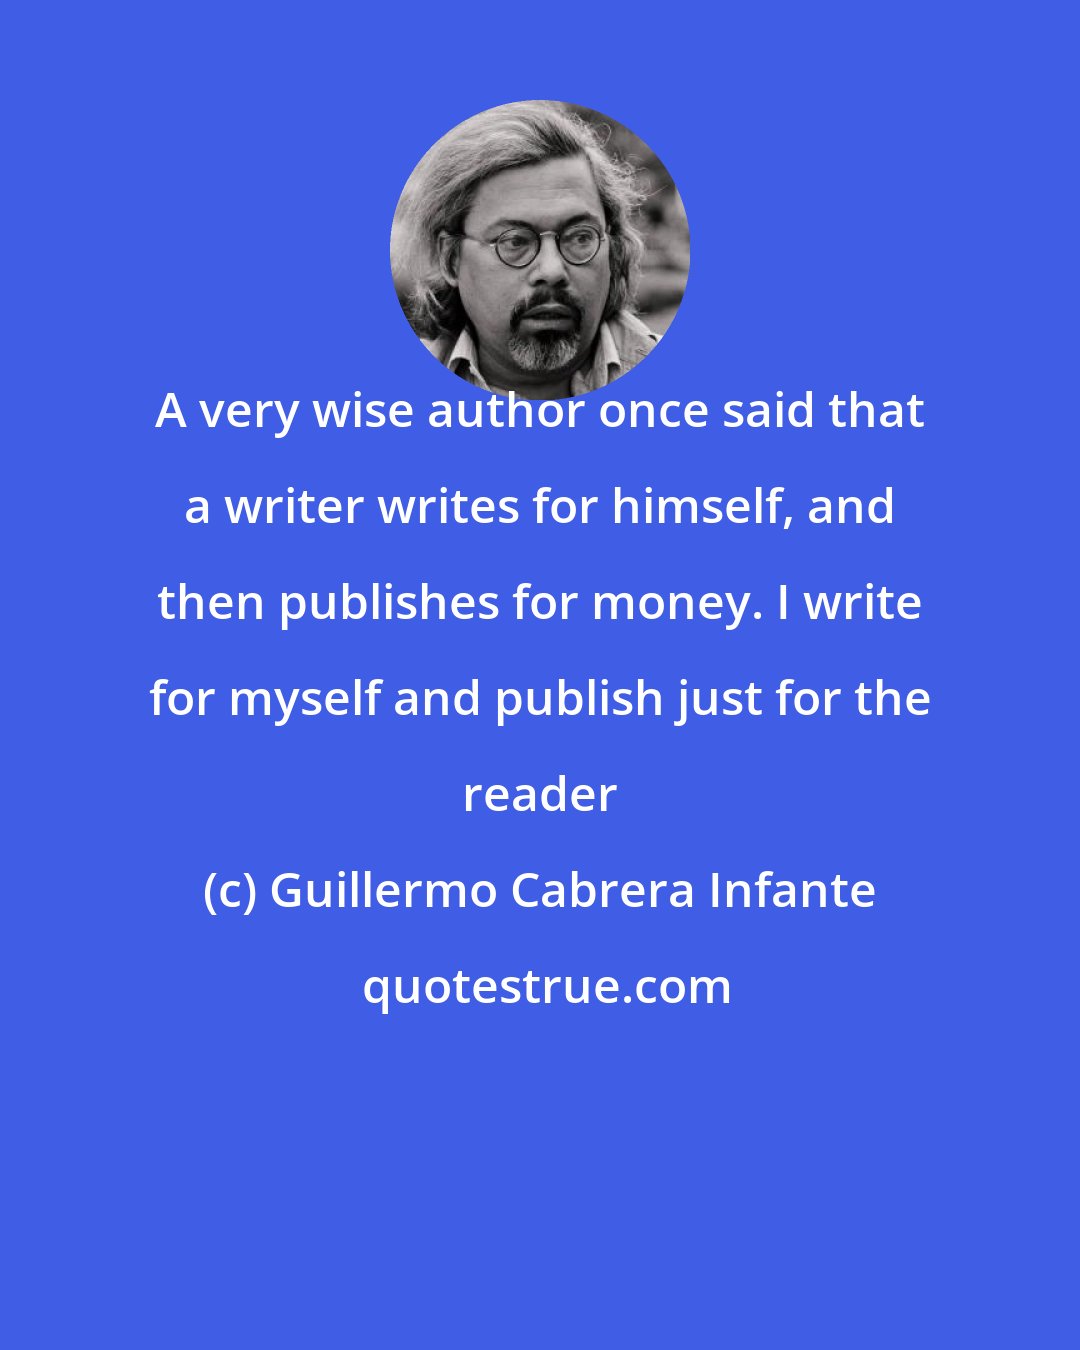 Guillermo Cabrera Infante: A very wise author once said that a writer writes for himself, and then publishes for money. I write for myself and publish just for the reader